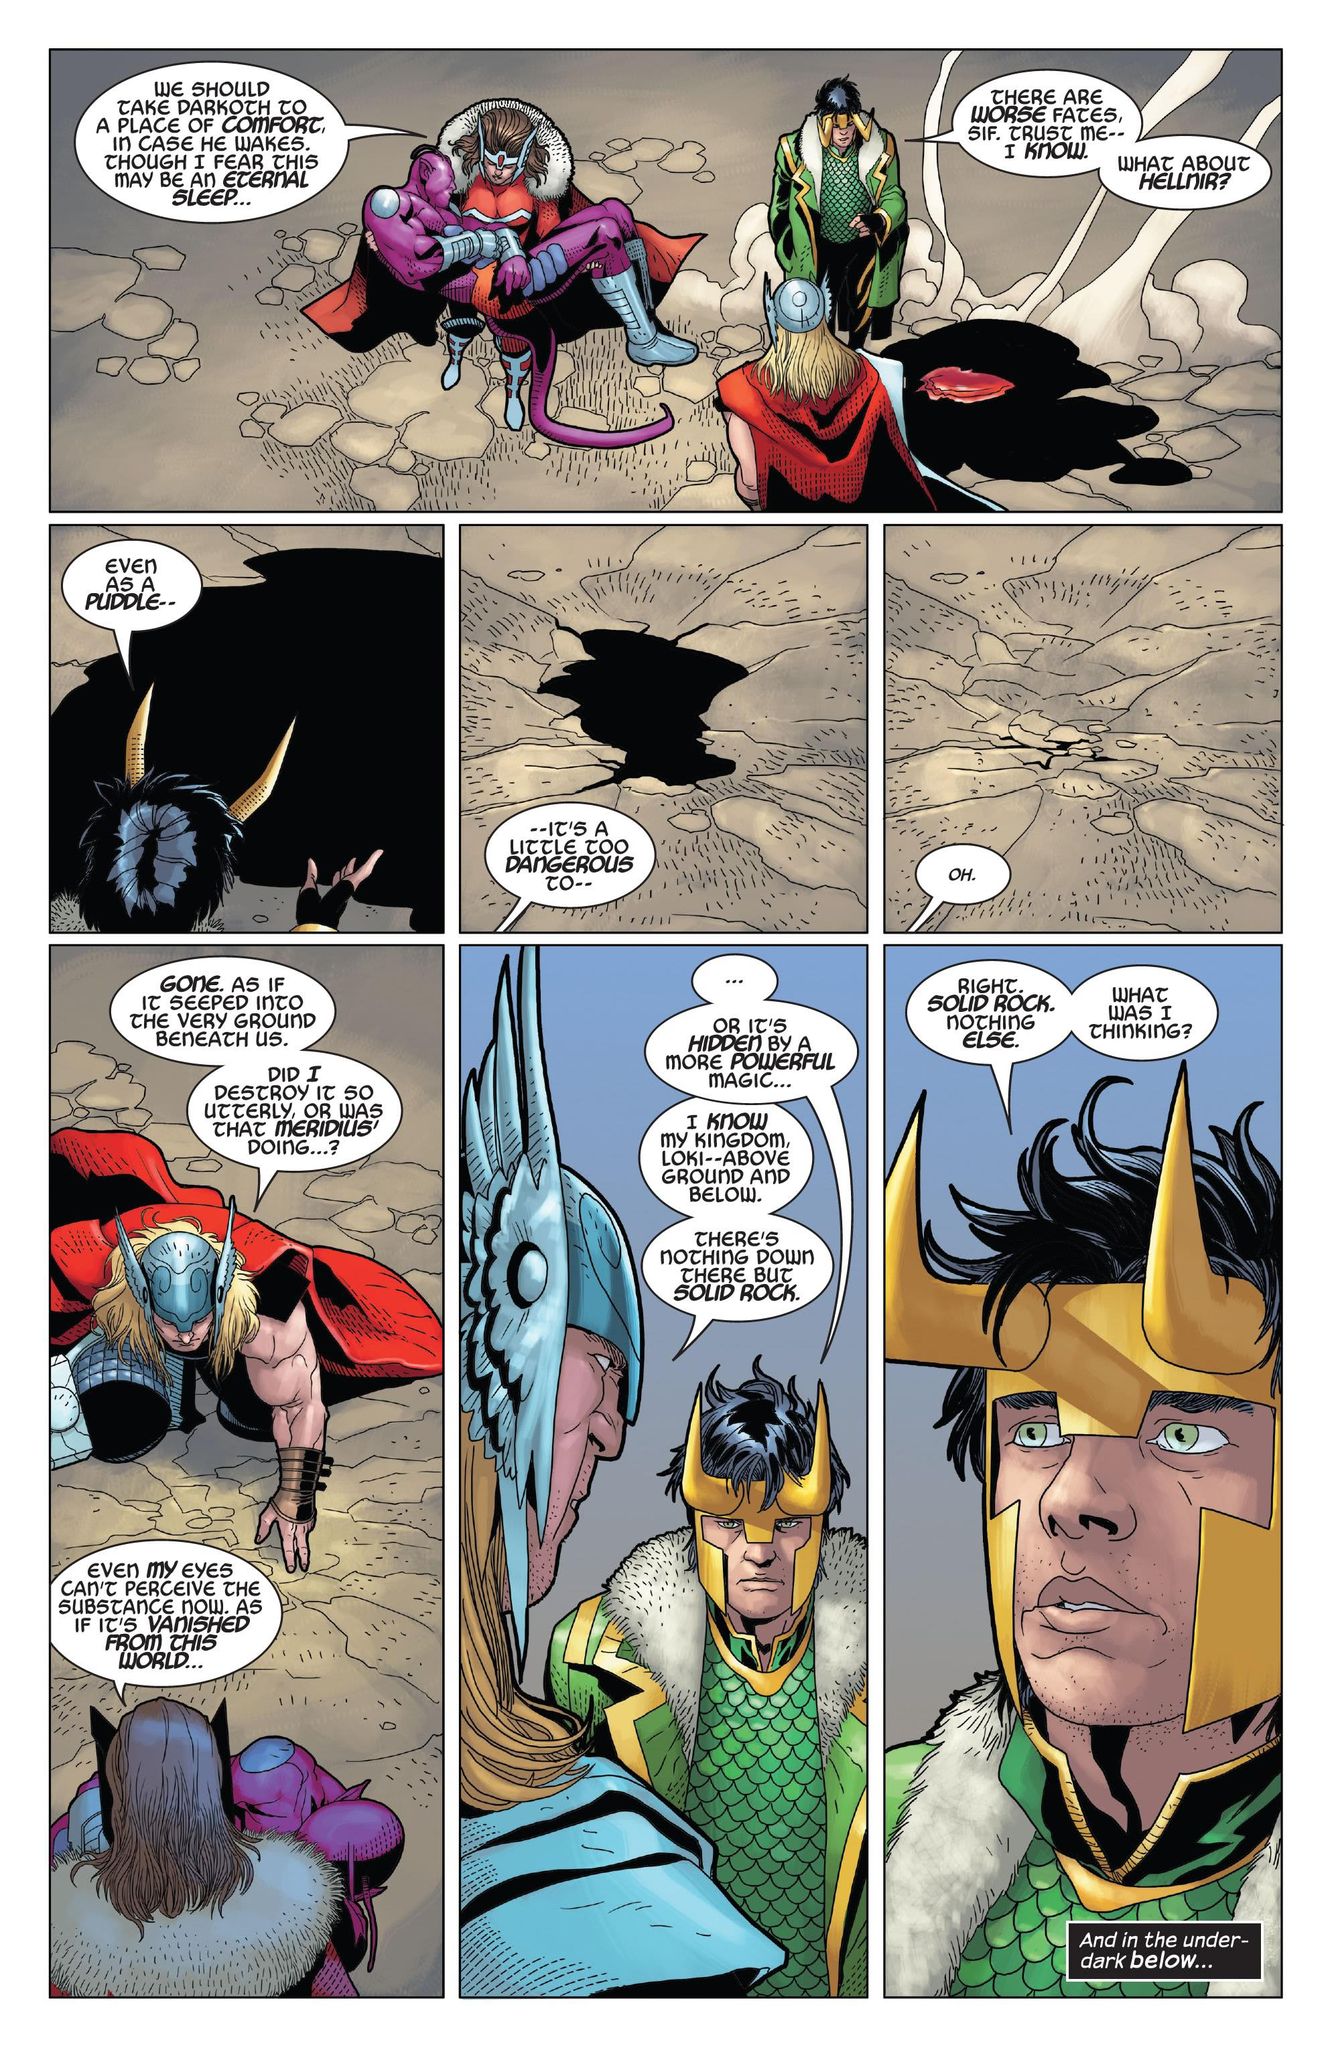 Thor and Loki watch Darkoth's symbiote slither away